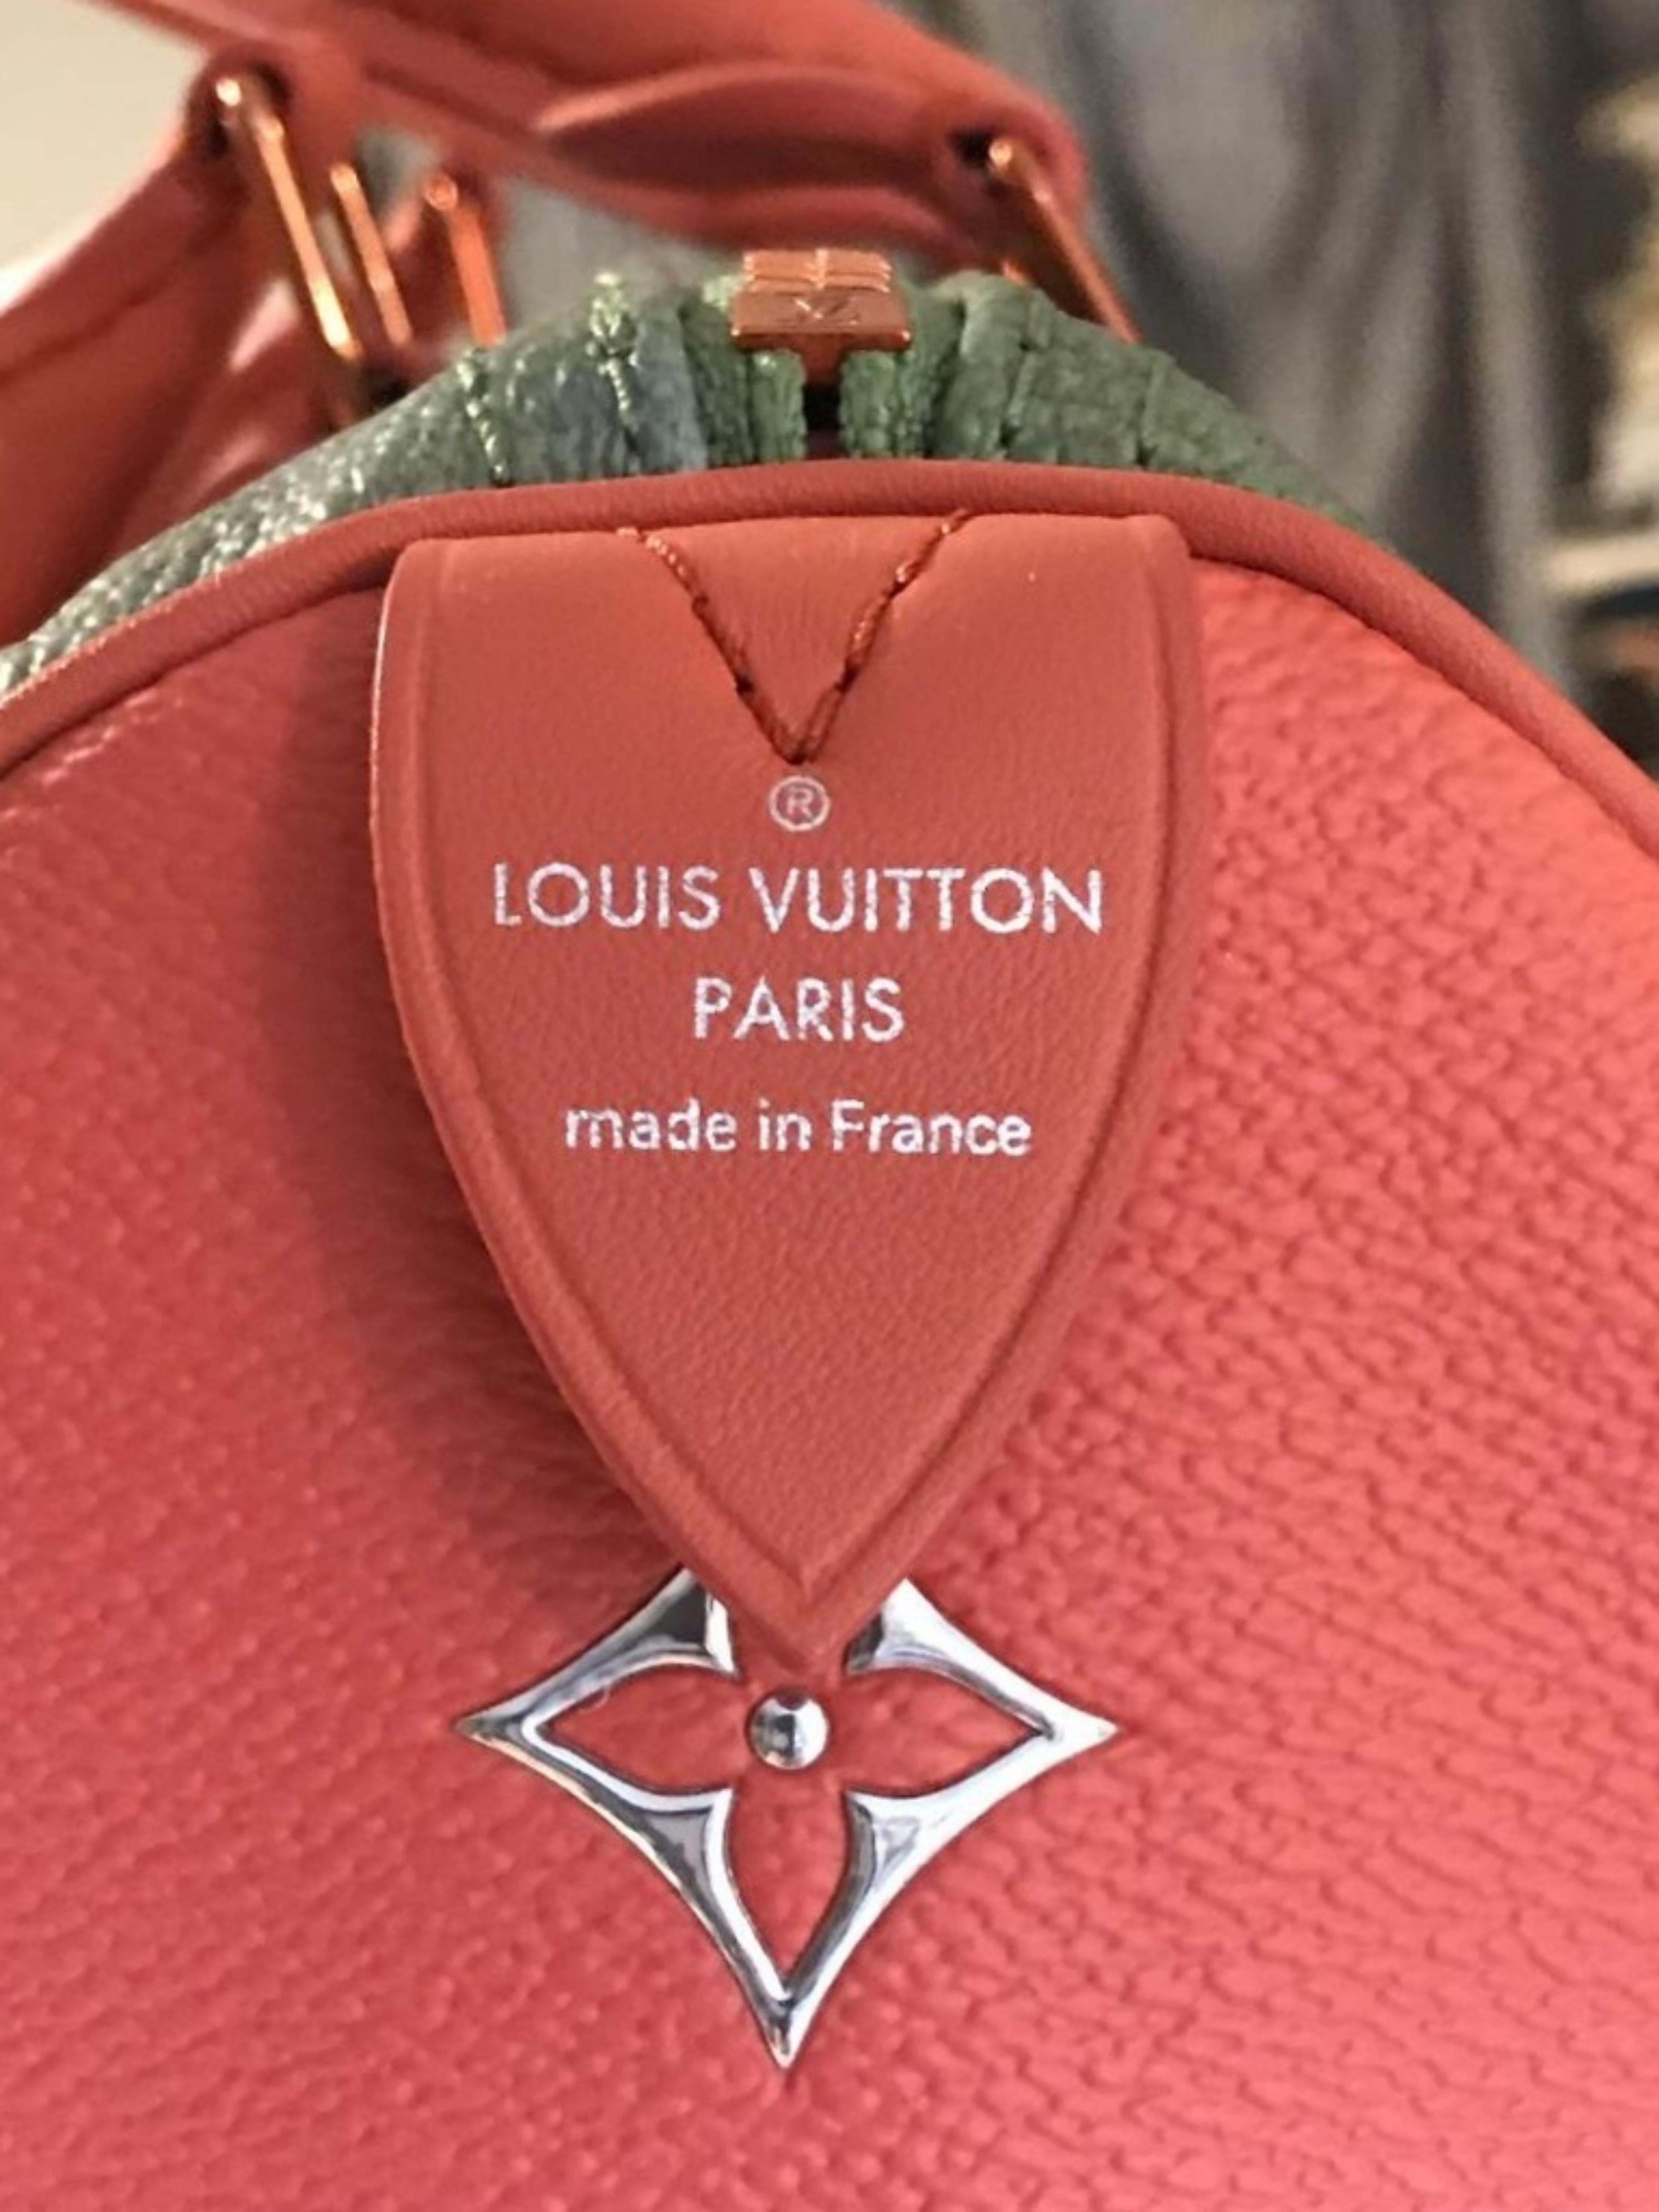 Louis Vuitton Da Vinci bag (uniquely hand signed and dated by Jeff Koons)  For Sale 1